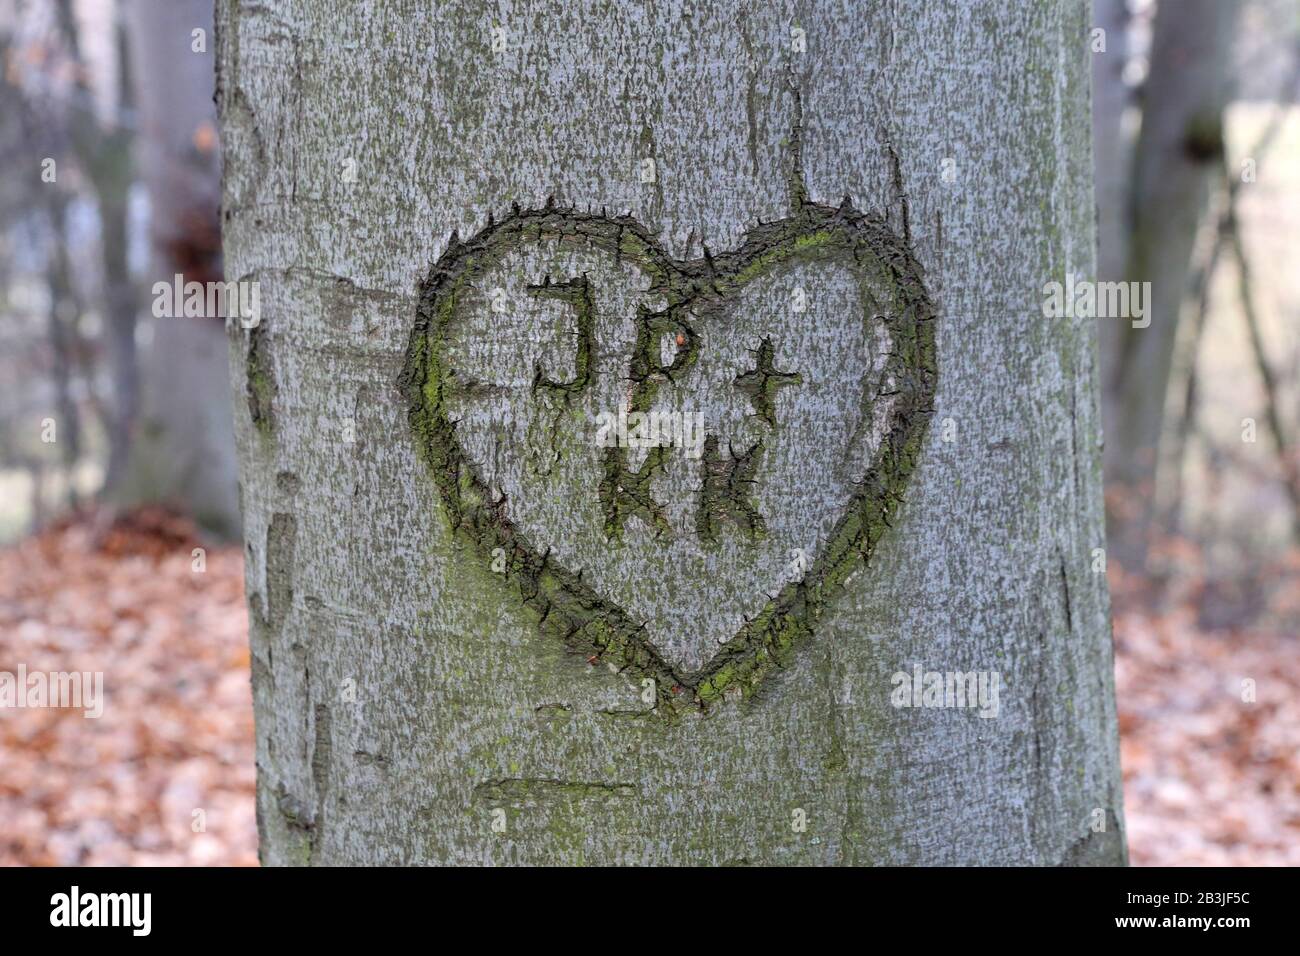 Initials of the couple in love in heart carved into tree trunk Stock Photo